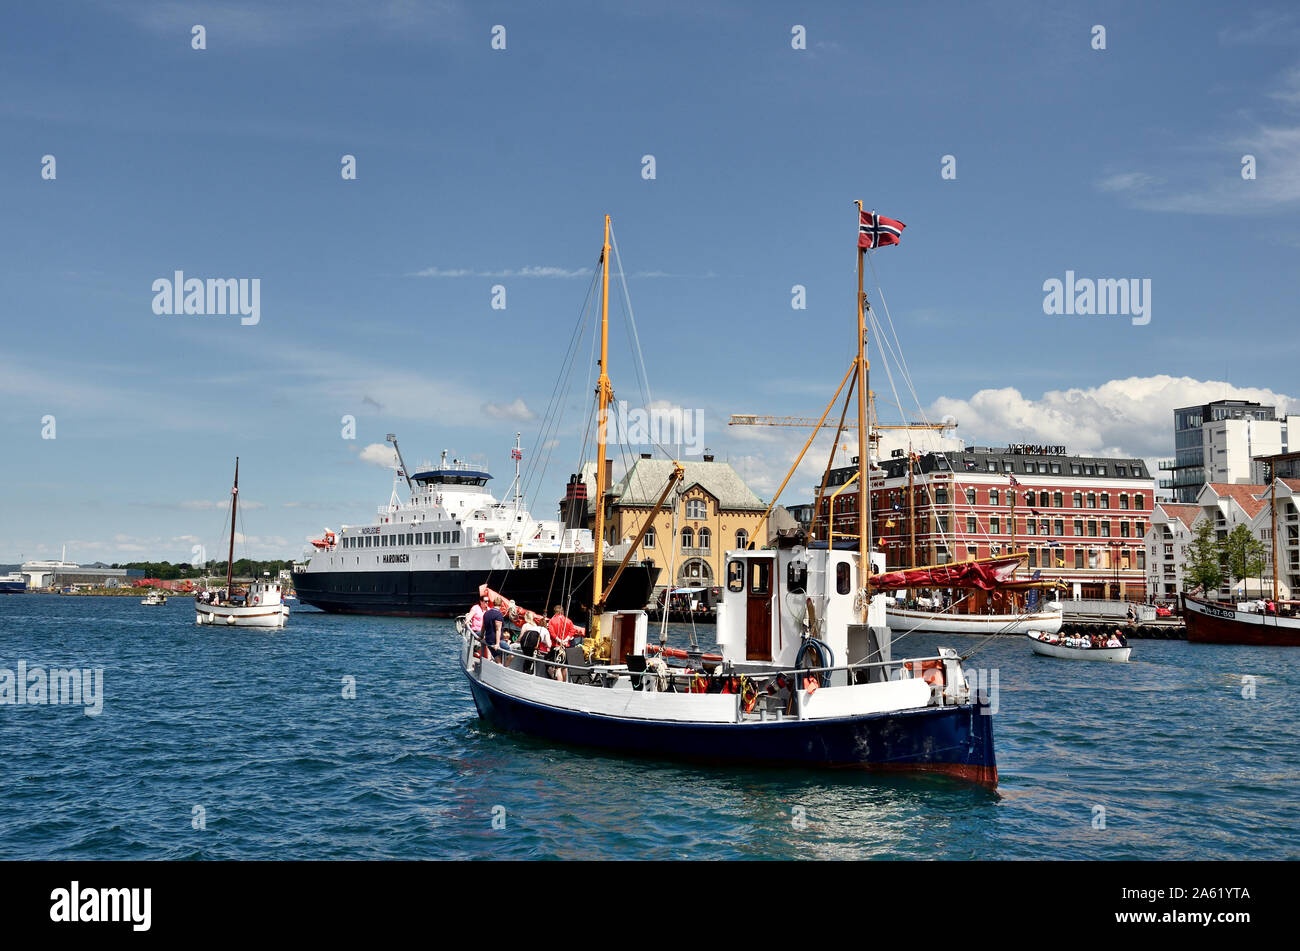 A Ferry at Stavanger Stock Photo